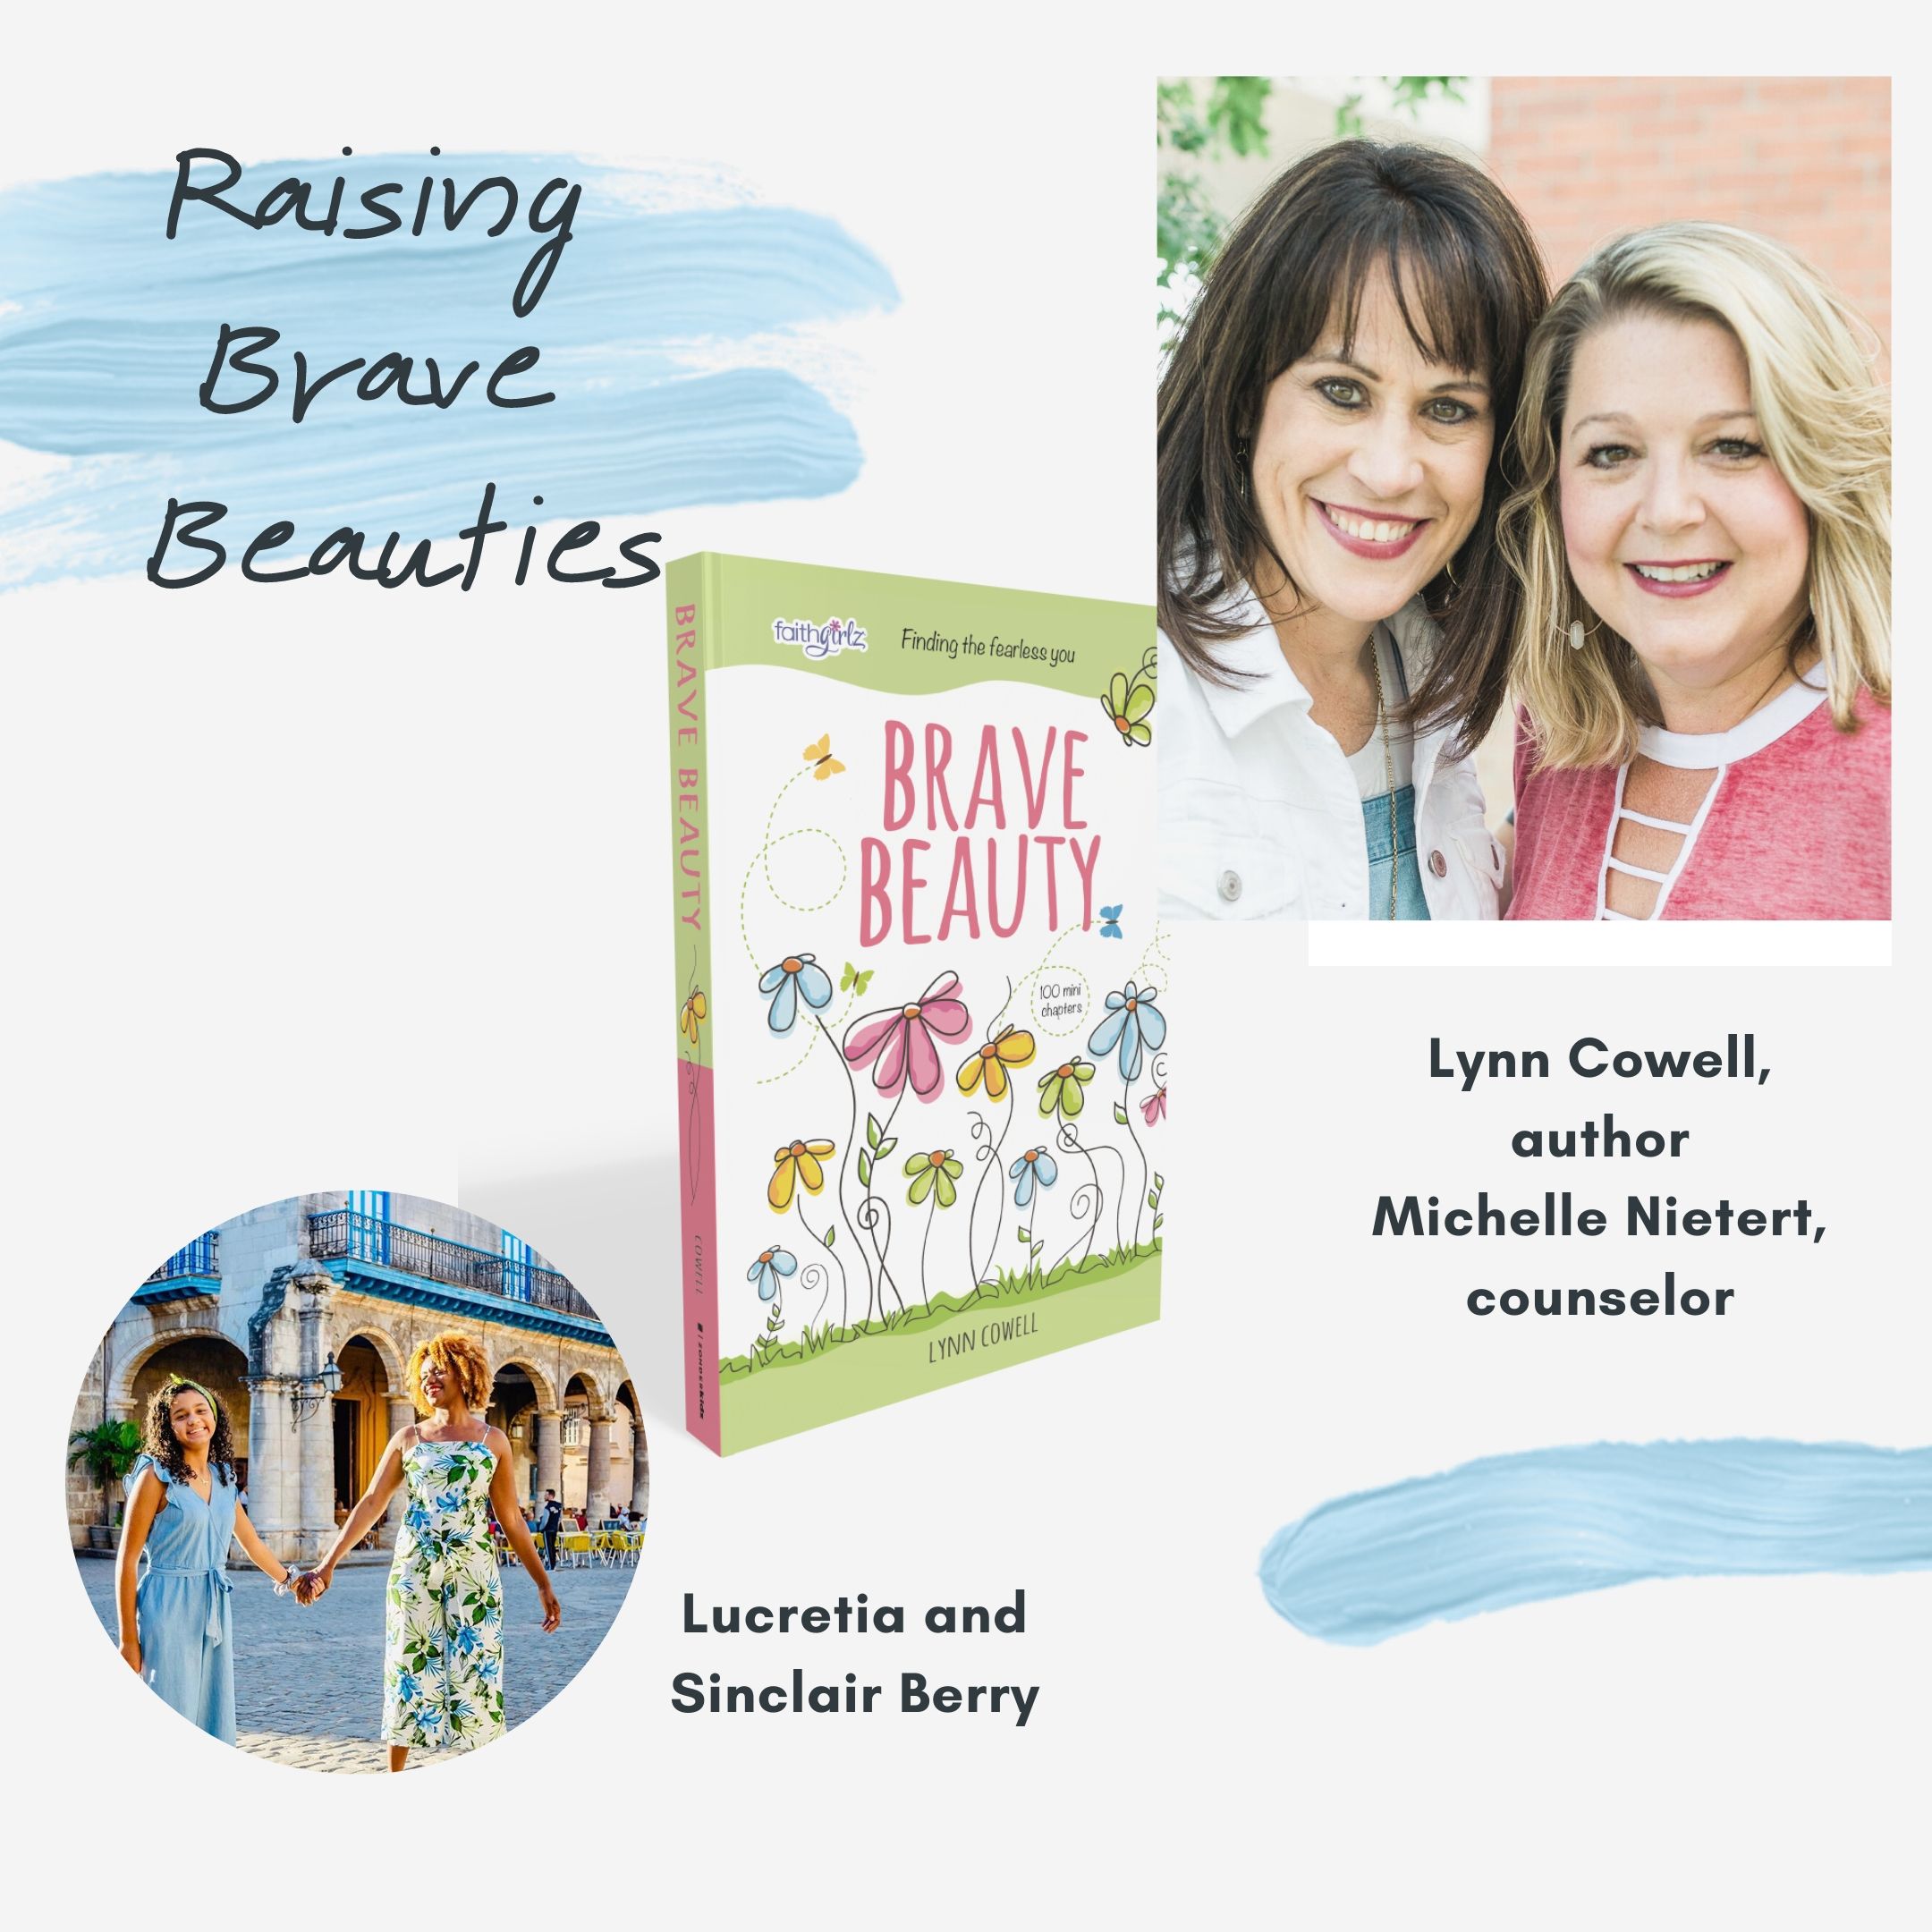 On this episode of Raising Brave Beauties podcast, professional counselor Michelle Nietert and I are joined by Dr. Lucretia Berry of Brownicity and her 13-year-old daughter Sinclair! Dr. Berry lives with her husband and three daughters in North Carolina. She has a PhD in education and is an author, writer, and TED speaker. On this episode, listen in as we talk to the Berrys about: ???? Multi-ethnic families and appreciations for our differences and similarities  ✝ What God can do if we invest in our children ⏳ Middle school - a strange time in life and the challenges that come with it ?? Surrendering in the process of learning; allowing God to be our children's teacher Listen wherever you listen to your podcasts!  Our devotional book for young girls “Loved and Cherished: 100 Devotionals for Girls” makes the perfect Christmas gift this year! Give the gift of knowing she is deeply and forever loved ... just as she is! Available on Amazon or at lovedandcherished.me ?✨?